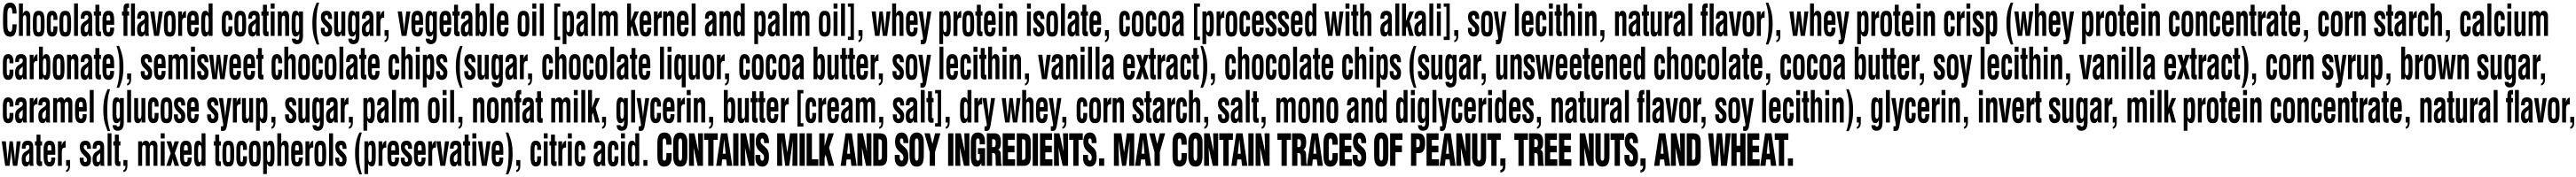 Image describing nutrition information for product Gatorade Recover Whey Protein Bar Chocolate Chip